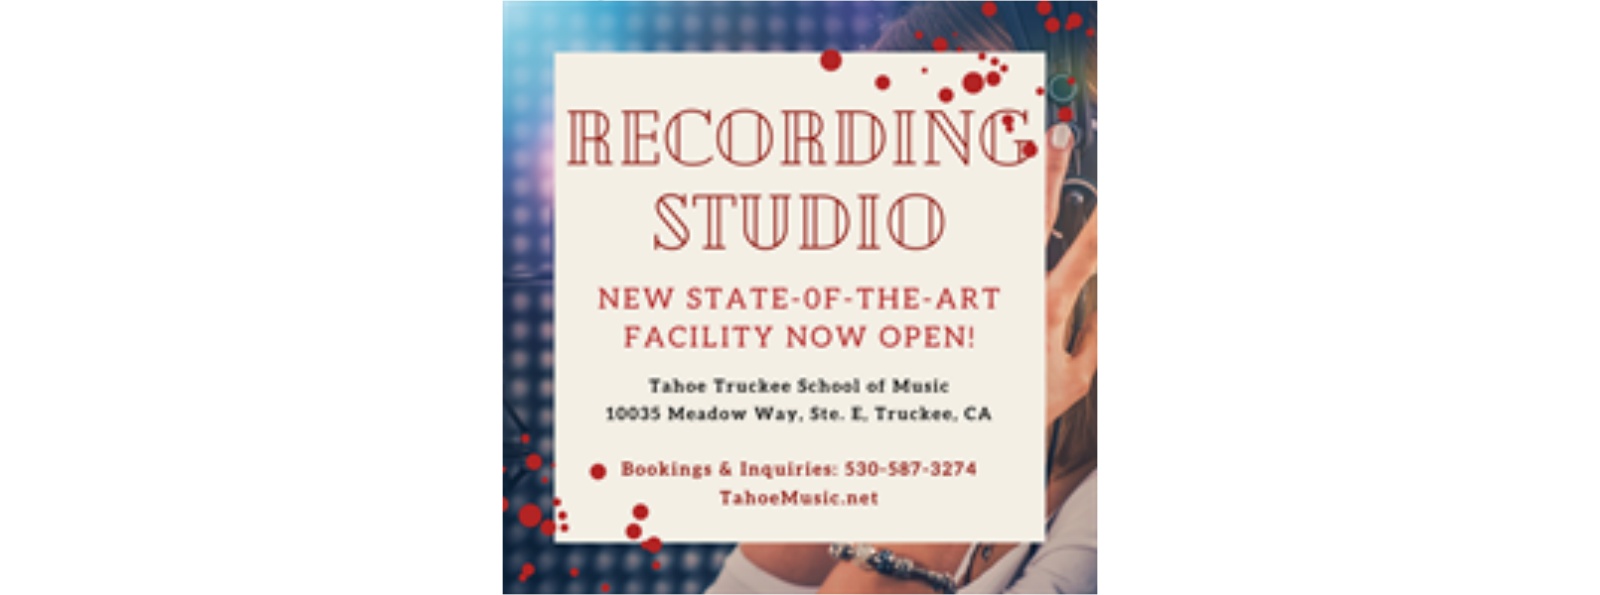 Tahoe Truckee School of Music Announces Completion of New State-of-the-Art Recording Studio